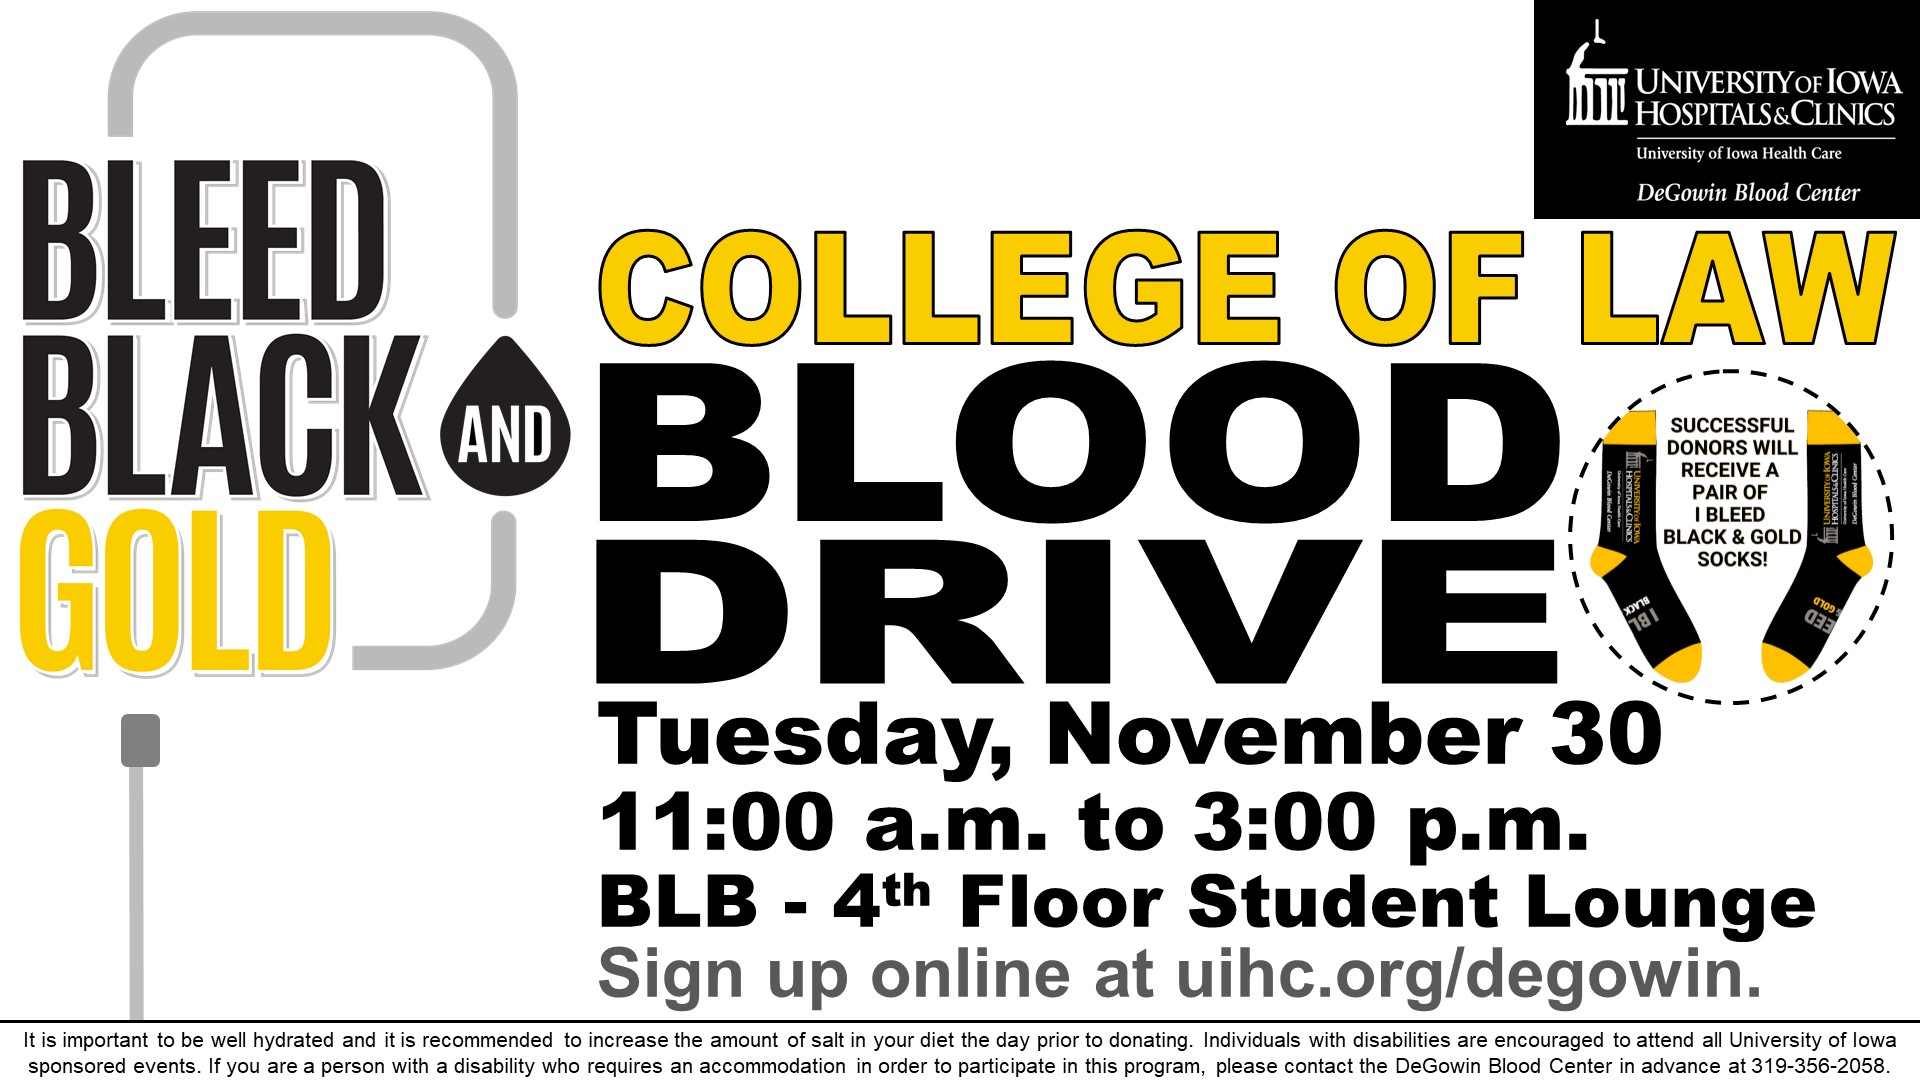    College of Law Blood Drive    Tuesday, November 30    11:00 a.m. to 3:00 p.m.    BLB - 4th Floor Student Lounge    Sign up online at uihc.org/degowin.